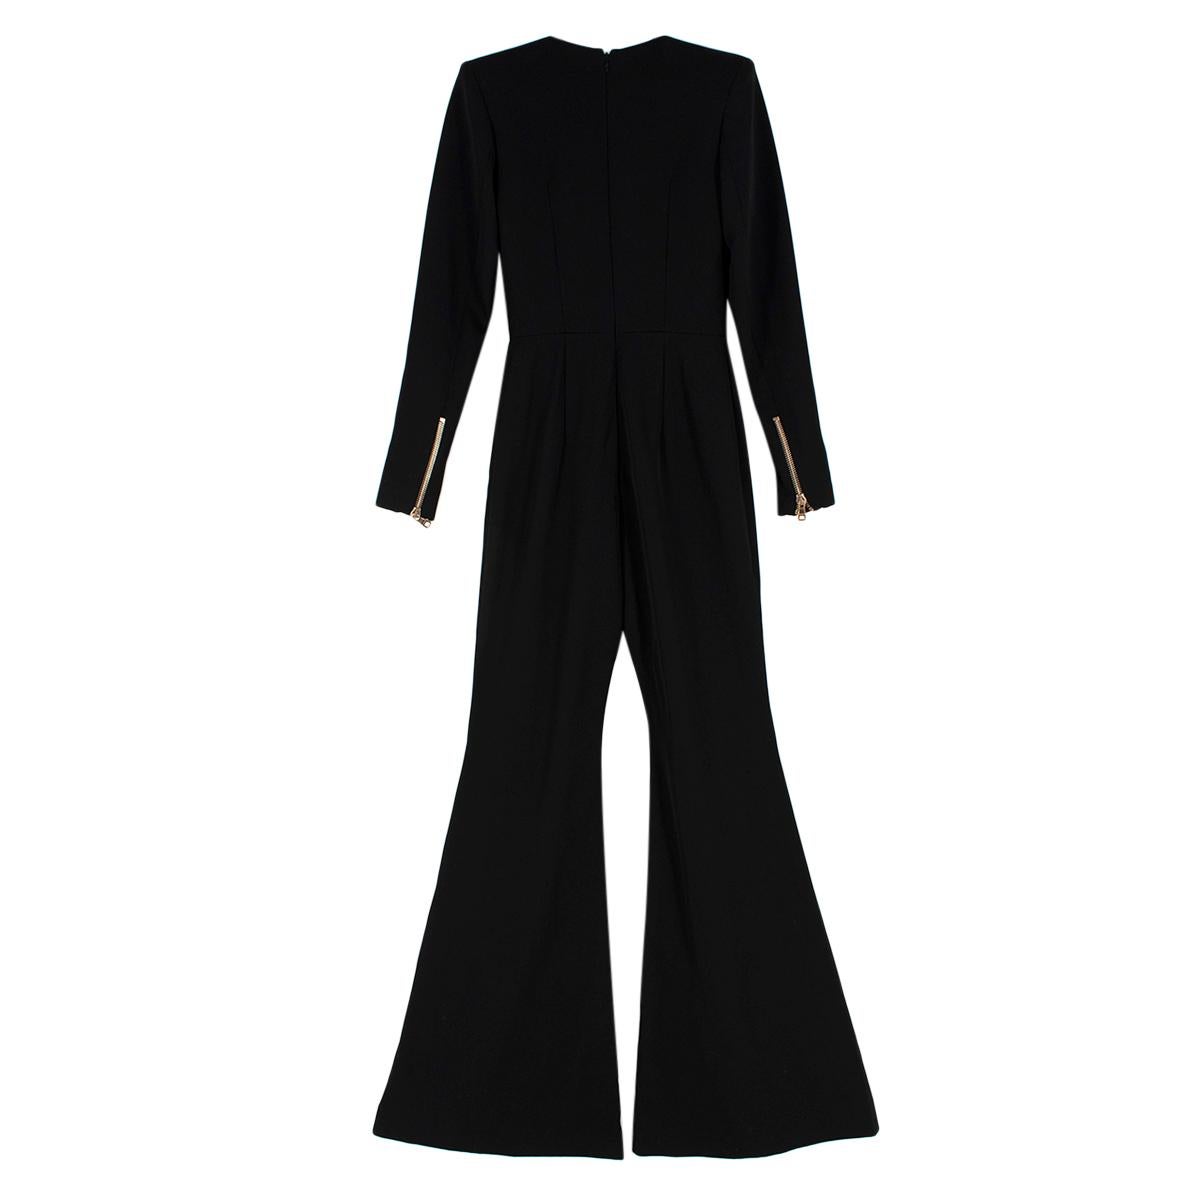 Balmain Double Breasted Wool Jumpsuit

- Handcrafted black wool jumpsuit
- V-shape neckline
- Exaggerated flared leg design
- Rows of signature Balmain gold buttons to make a bold statement
- Structured padded shoulders
- Zipped cuffs 

Made in